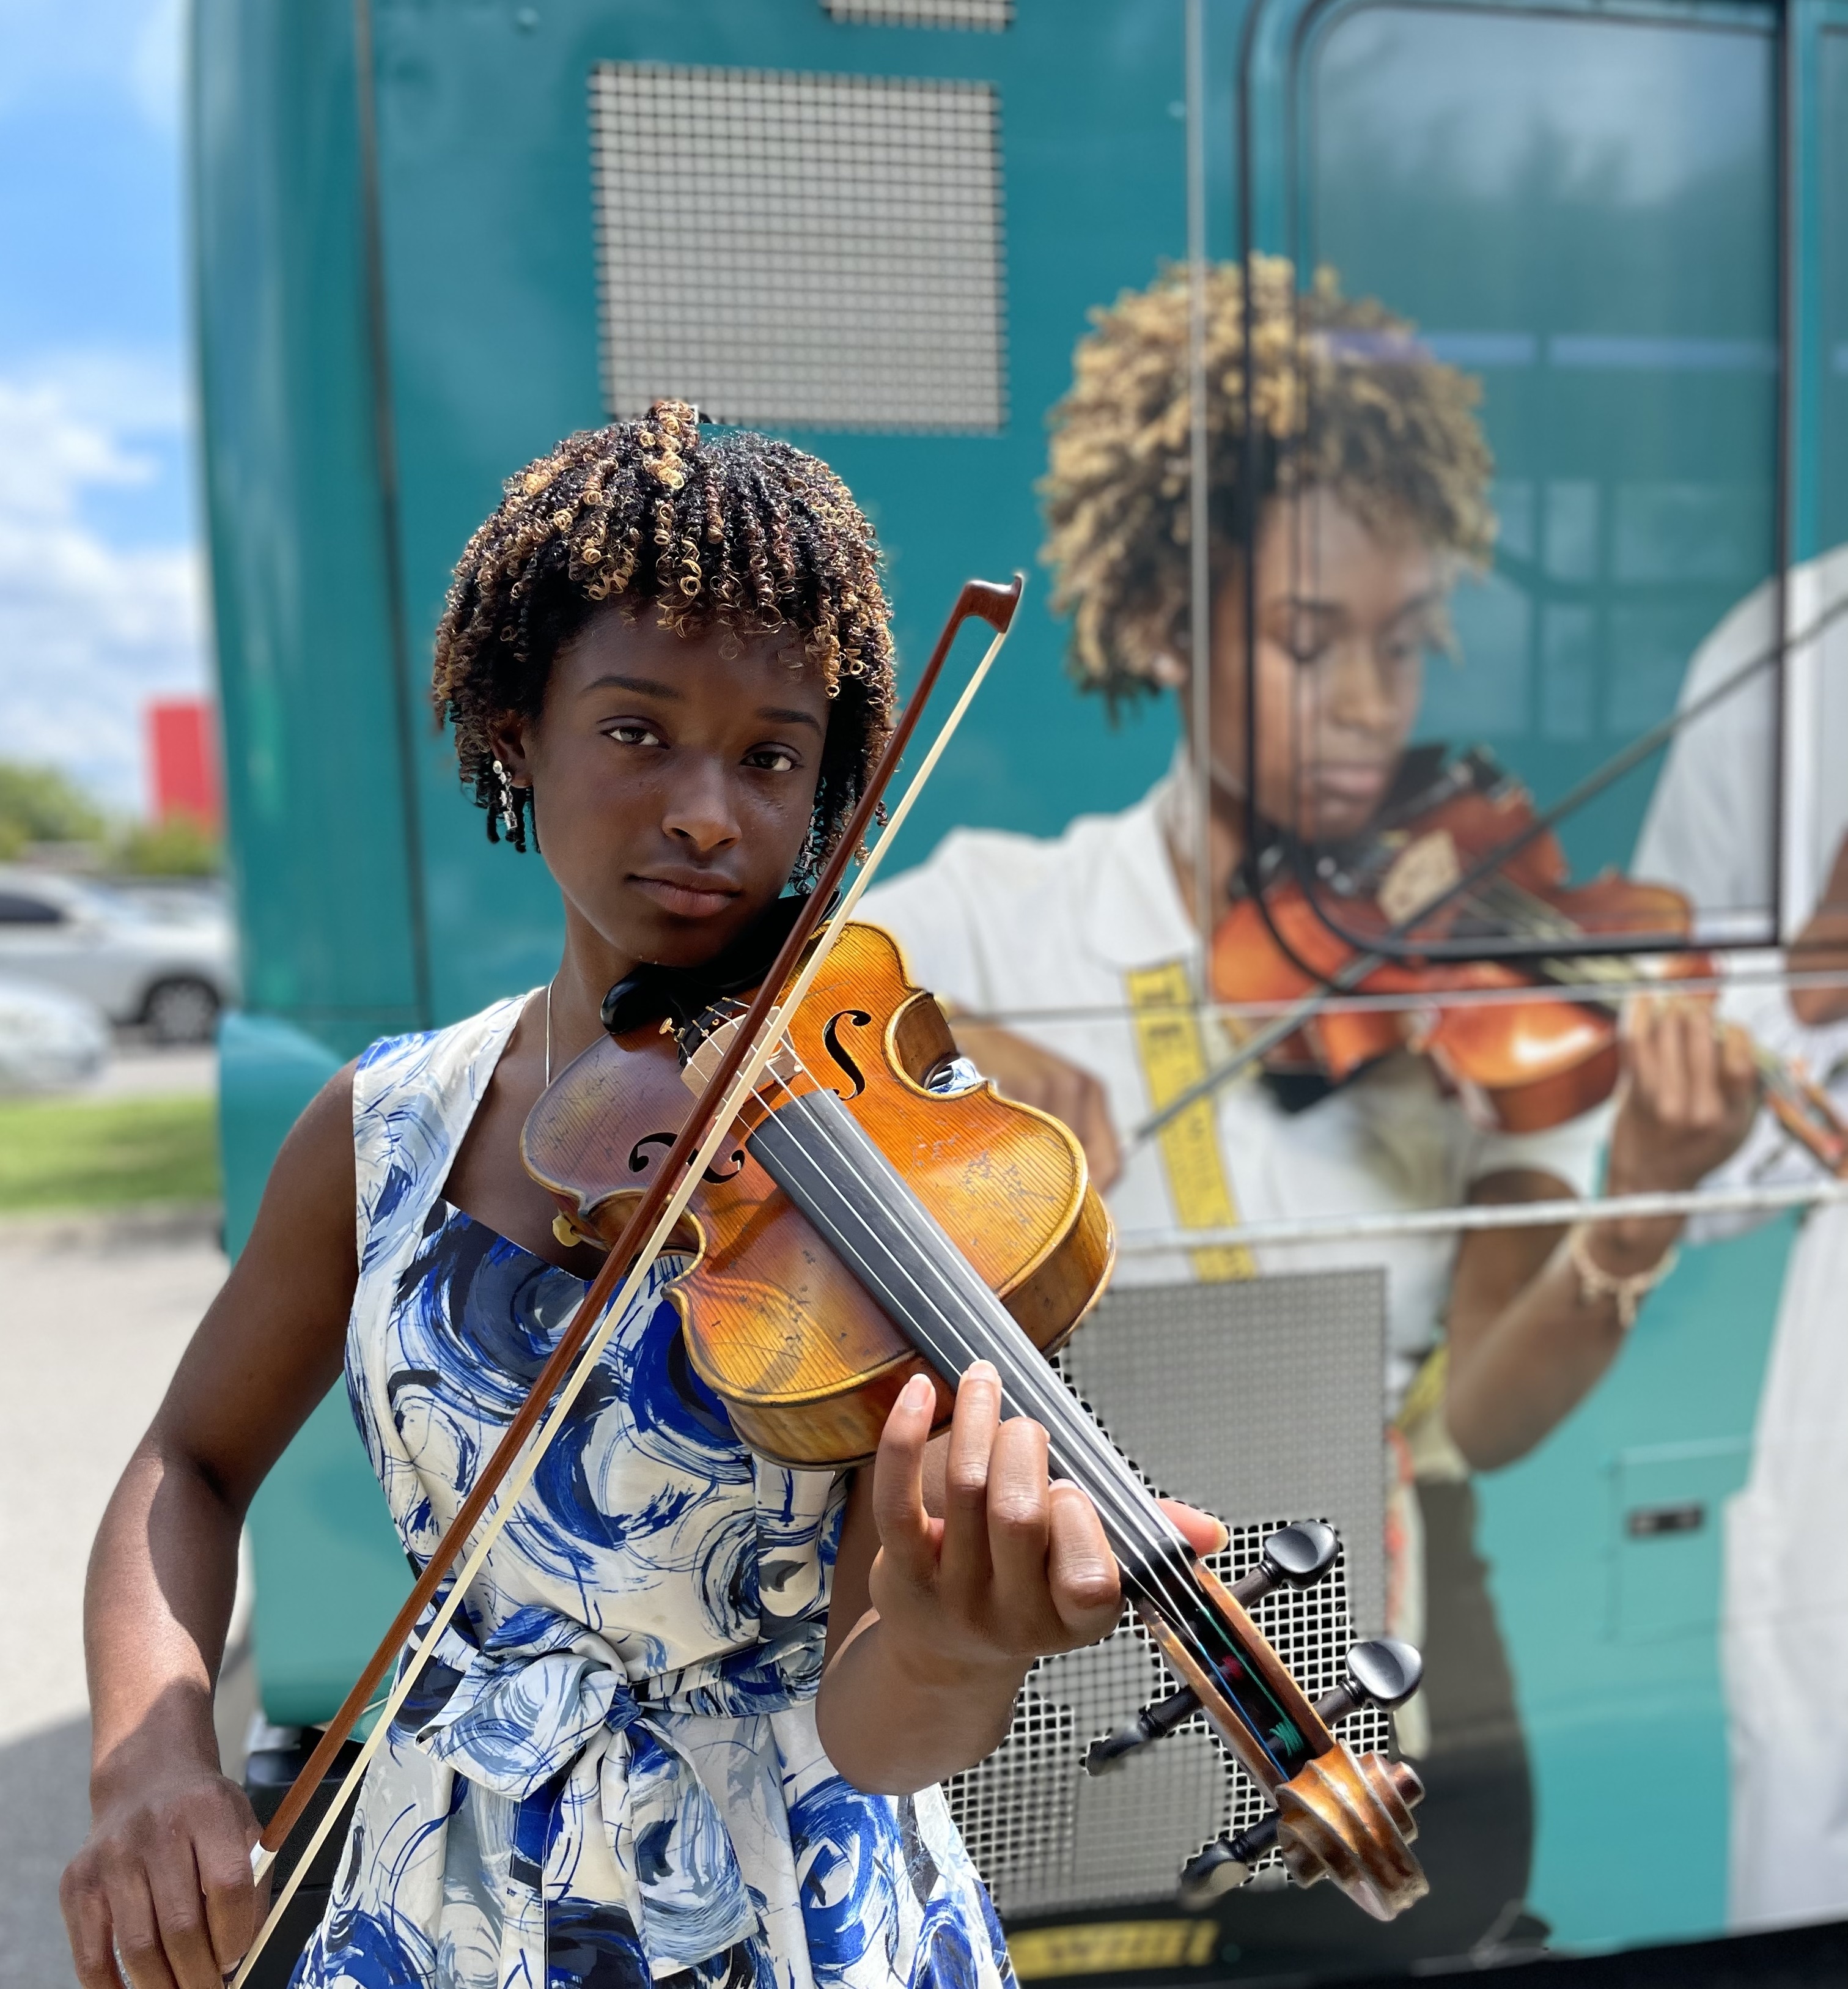 As part of the arrangement, Nashville State had the use of new first-class pianos and digital pianos on a no-cost basis for the 2023-2024 school year. In 2022, the Foundation generously gifted a handmade Stravari Arista violin valued at around $10,000 to then-student Loren Hatcher.